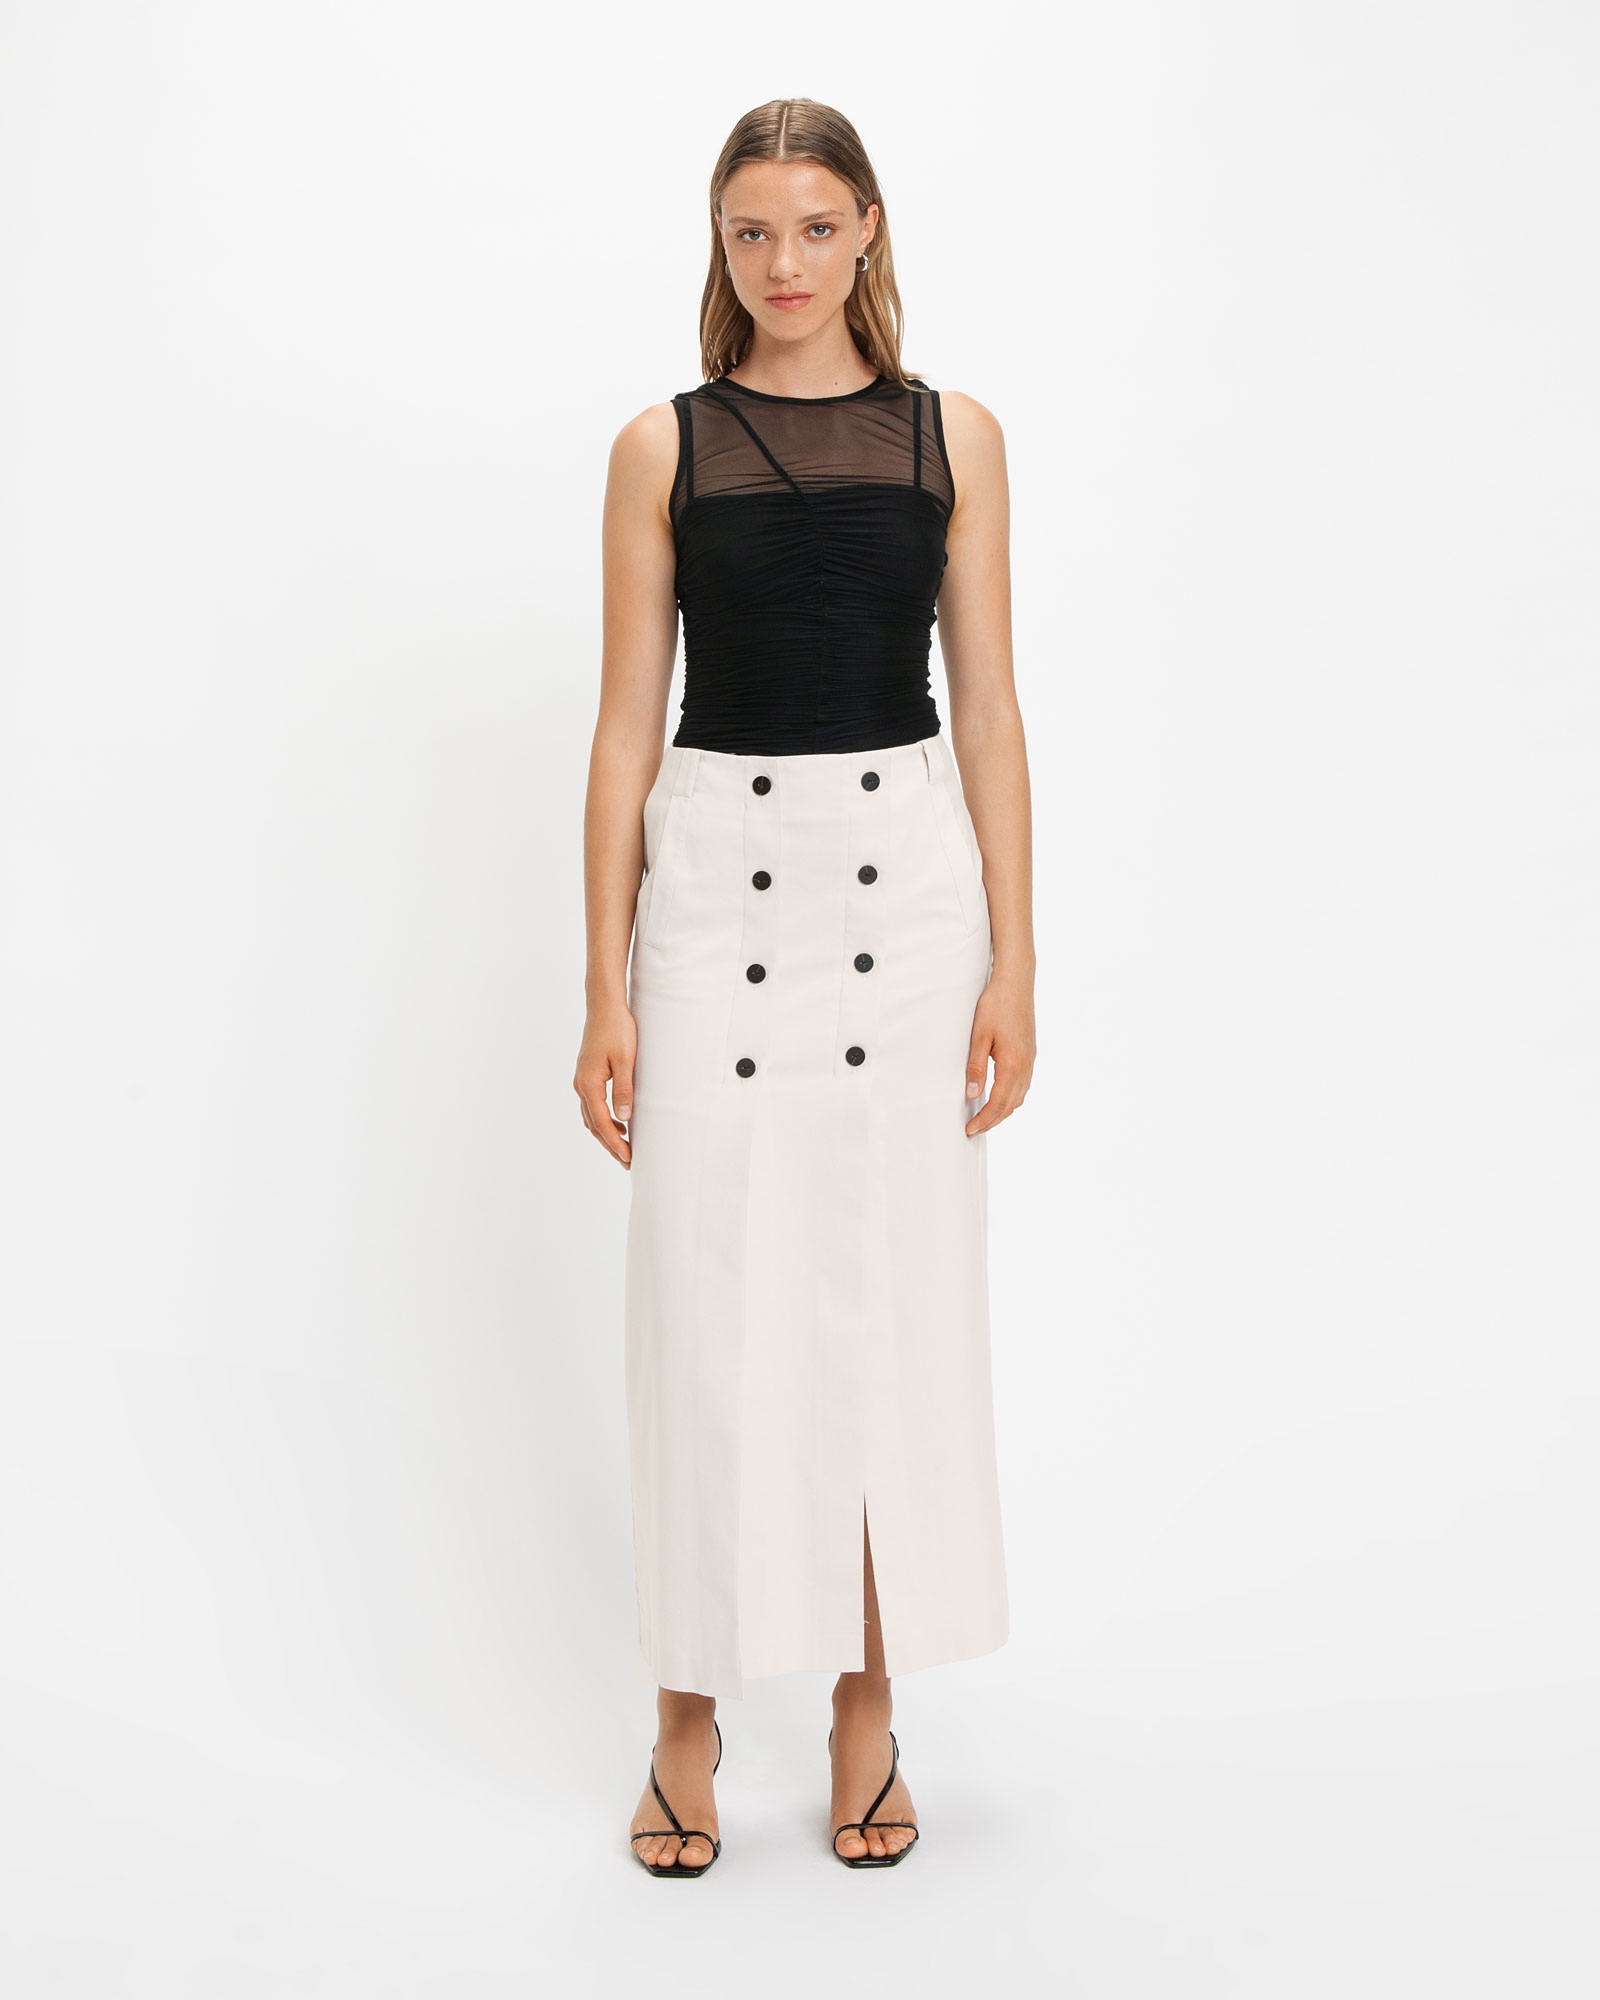 Ruched Mesh Top  Buy Tops and Shirts Online - Cue